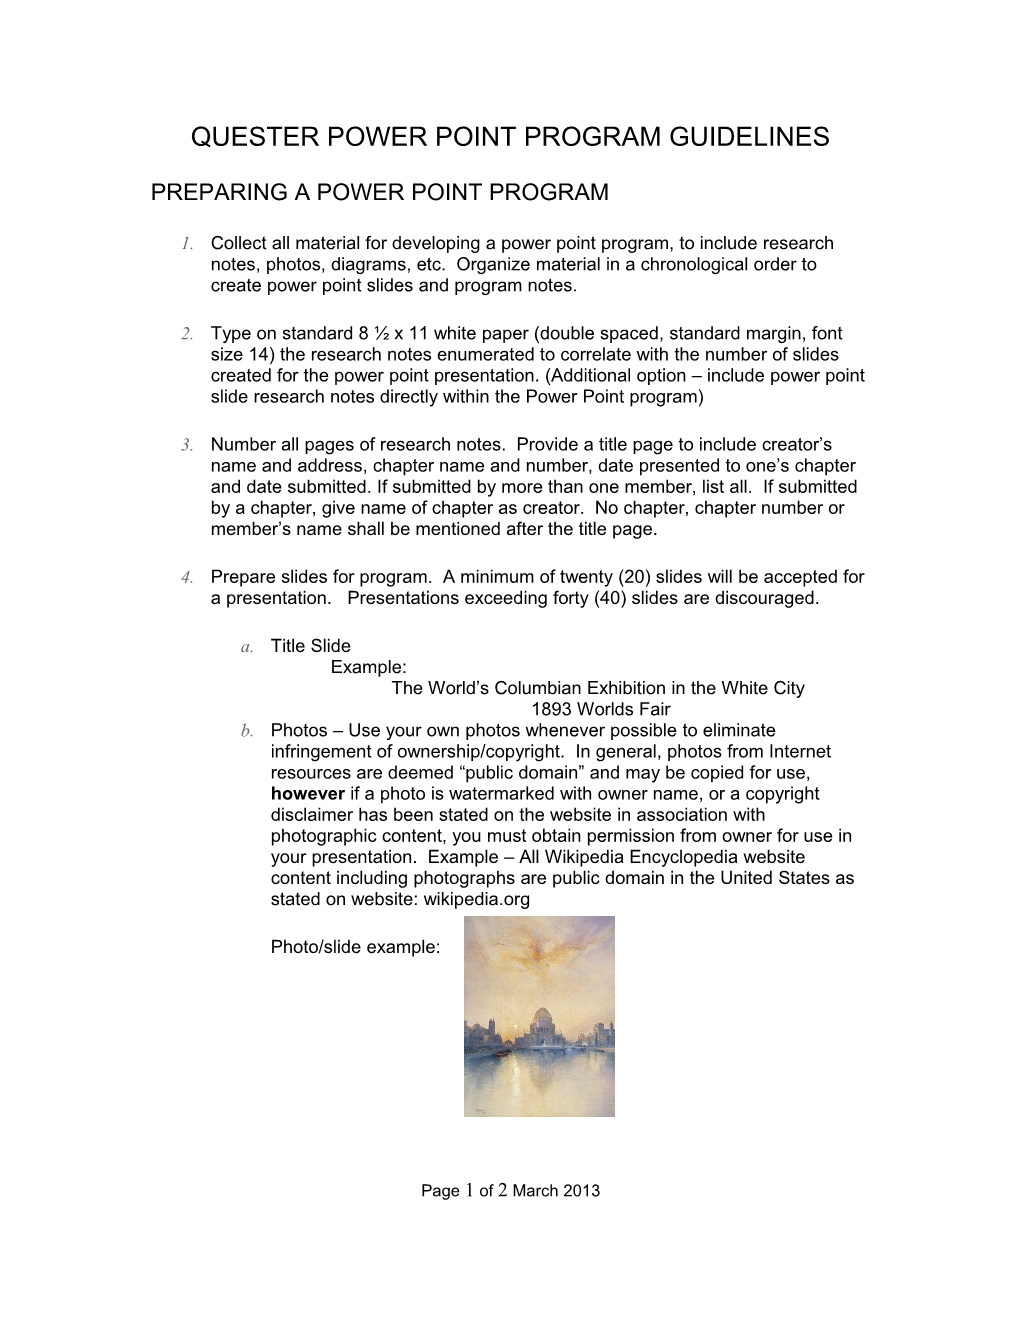 Quester Power Point Program Guidelines